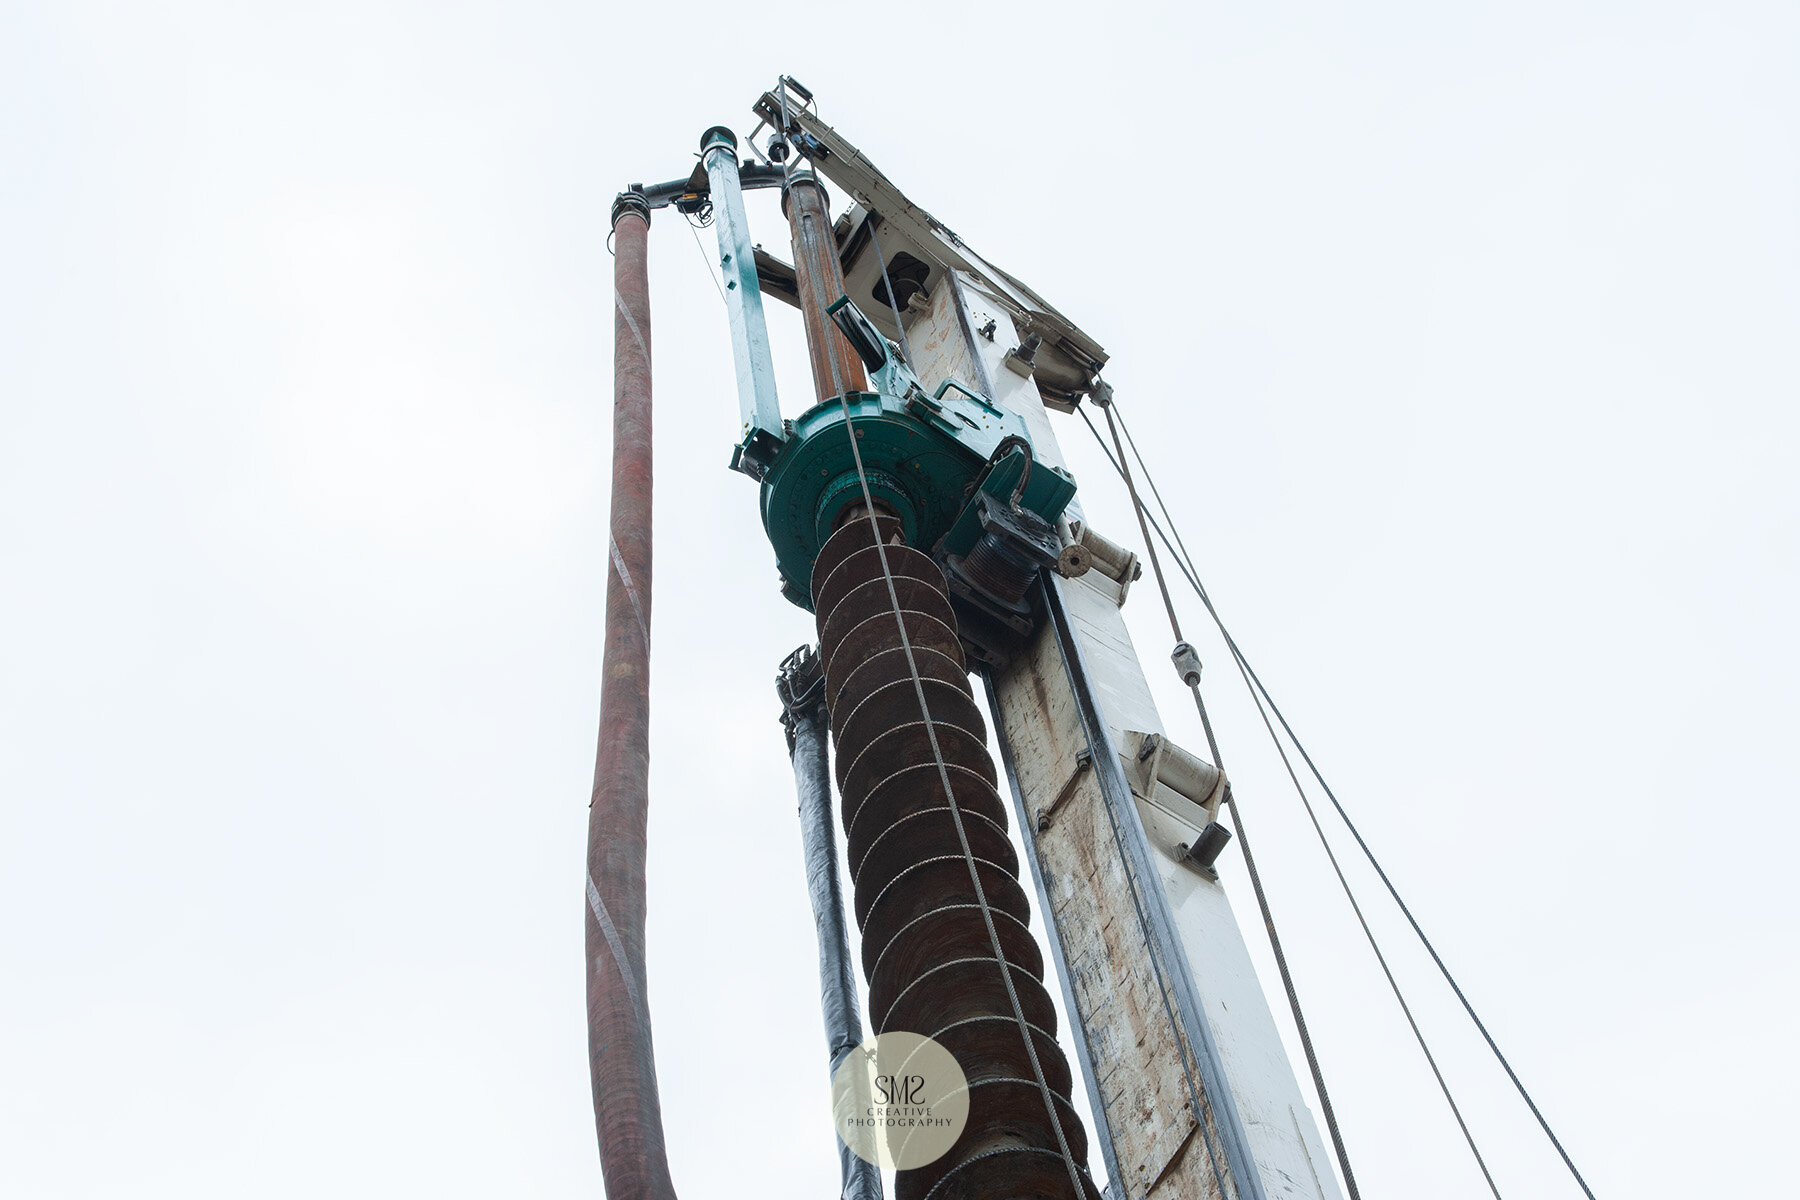  The hose at the top of the piling rig works in unison with the drill (the auger), a swift process in preparation for a metal ‘cage’ to be inserted in the hole. 